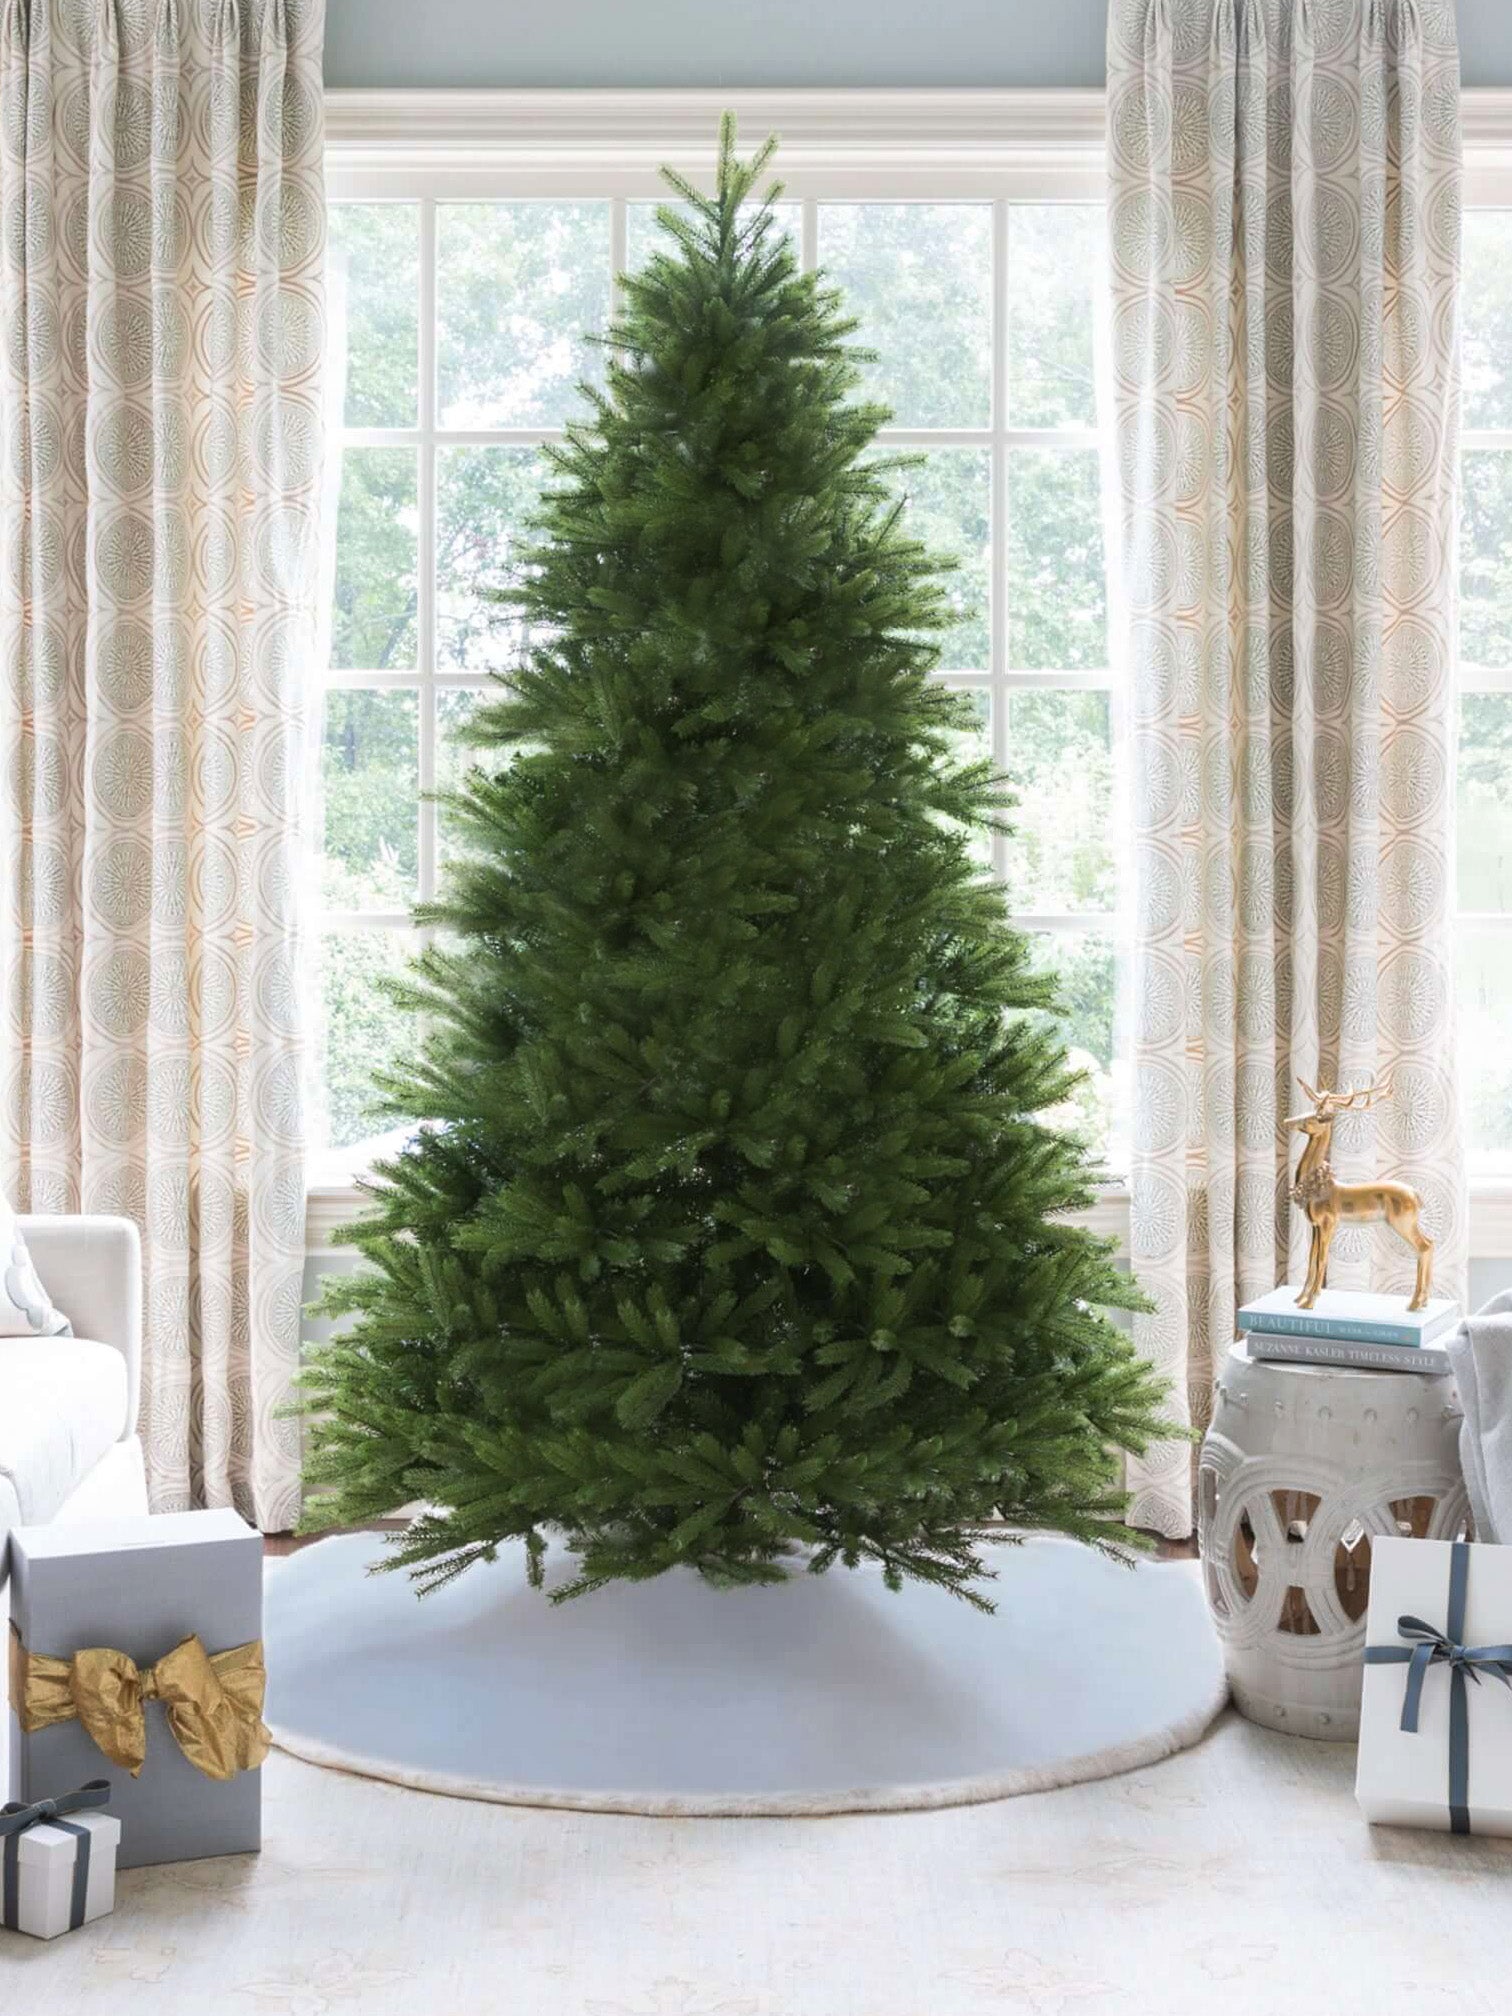 King of Christmas 12' King Fraser Fir Quick-Shape Artificial Christmas Tree with 2300 Warm White & Multi-Color LED Lights